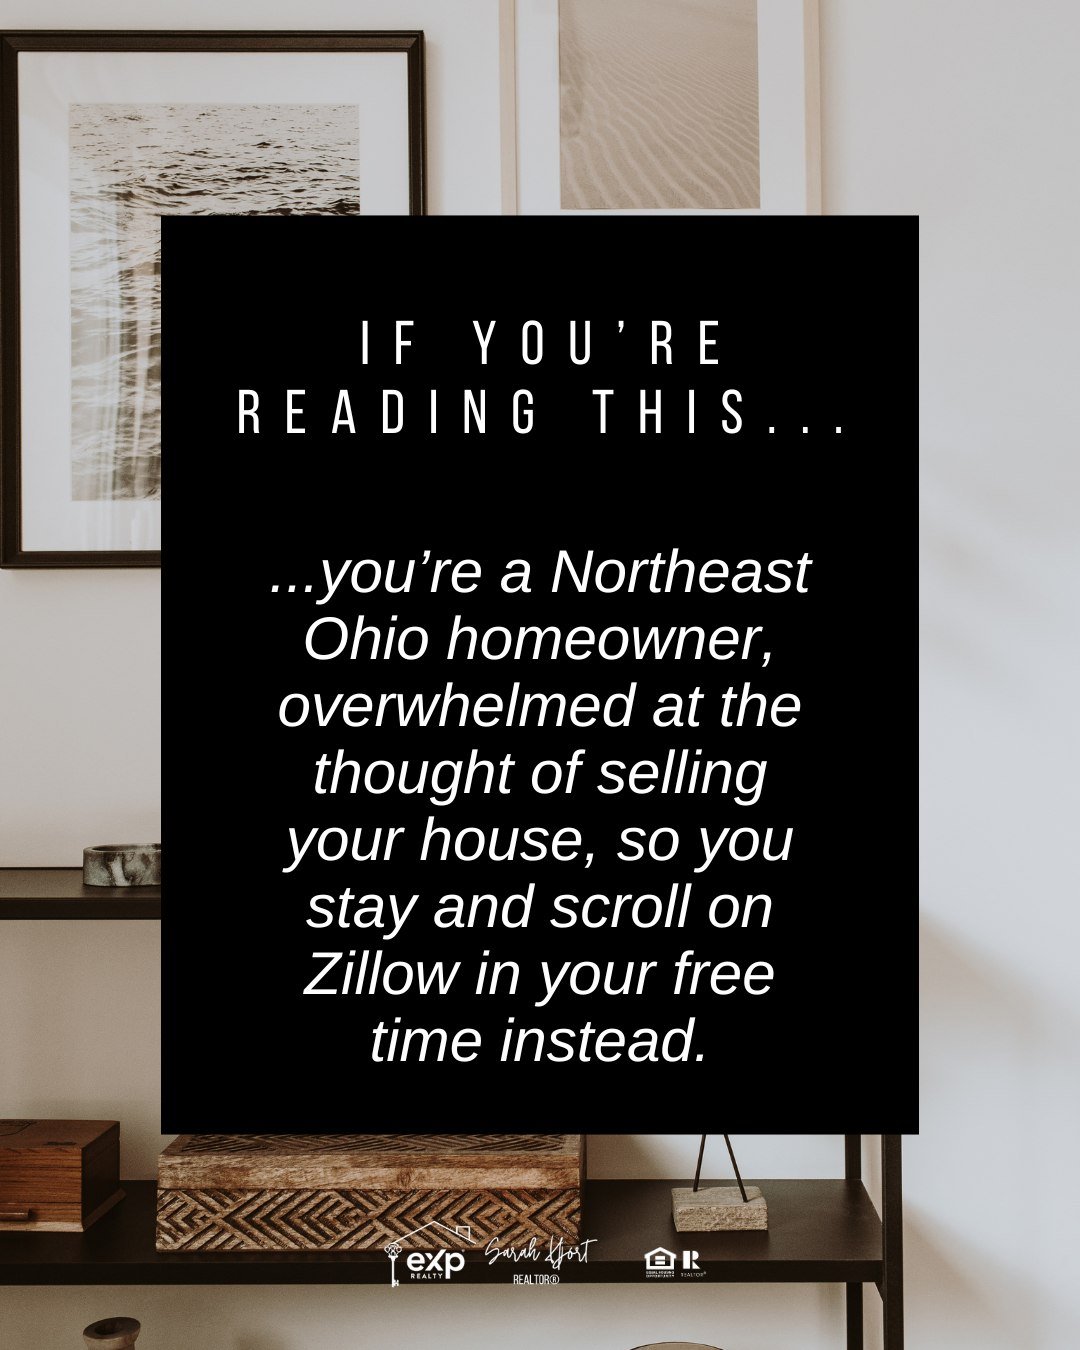 1. Do you have to sell your home before you buy? 

A lot of sellers are surprised to learn they don't have to sell before they buy their next home. This can take a lot of stress off your plate because you don't have to worry about decluttering, organ